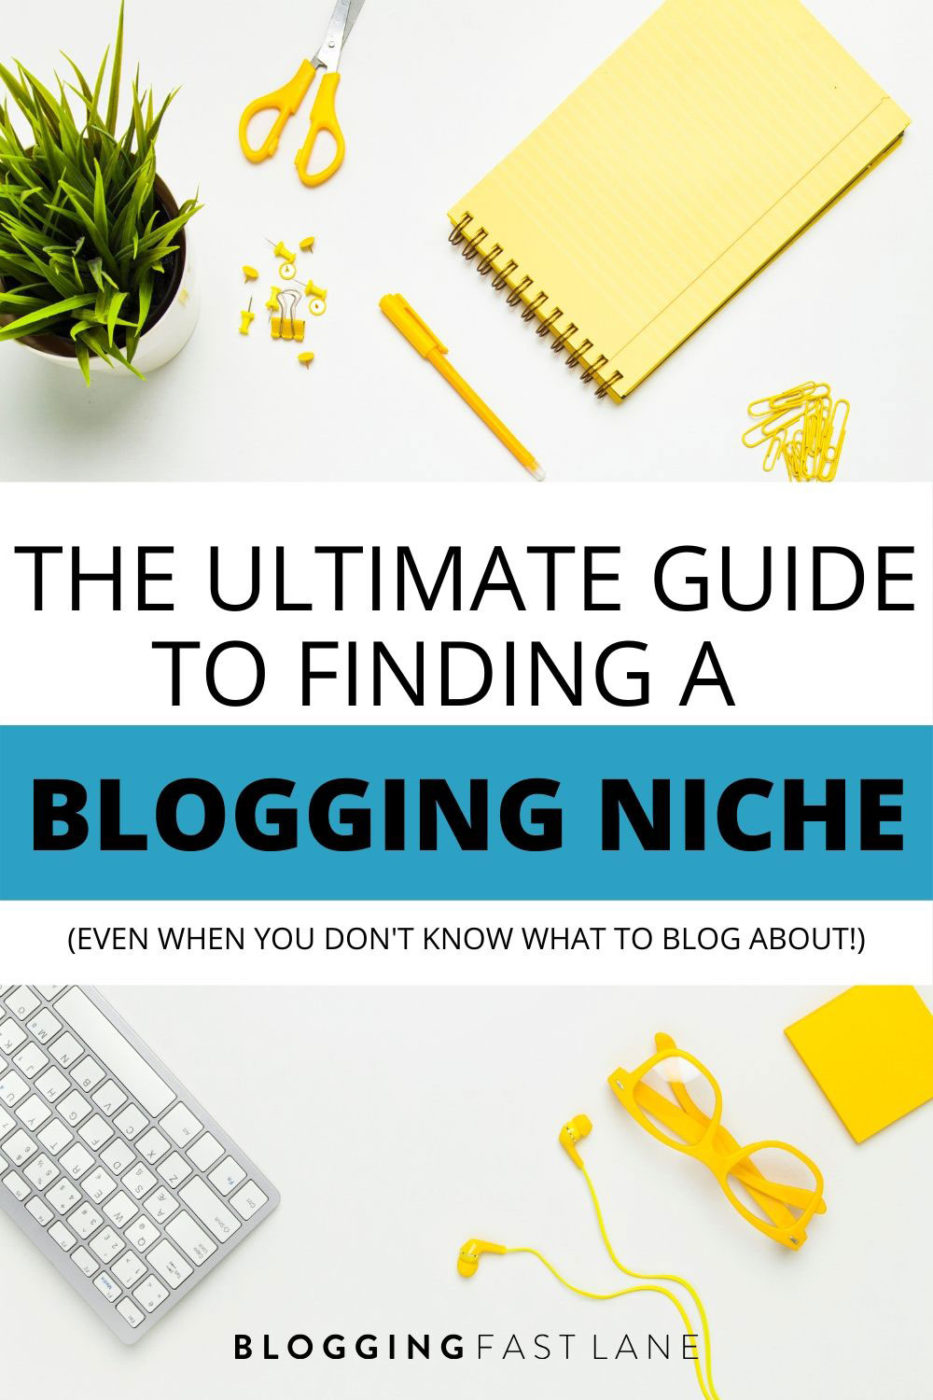 Blogging Niche | How to find a profitable blogging niche for your blog